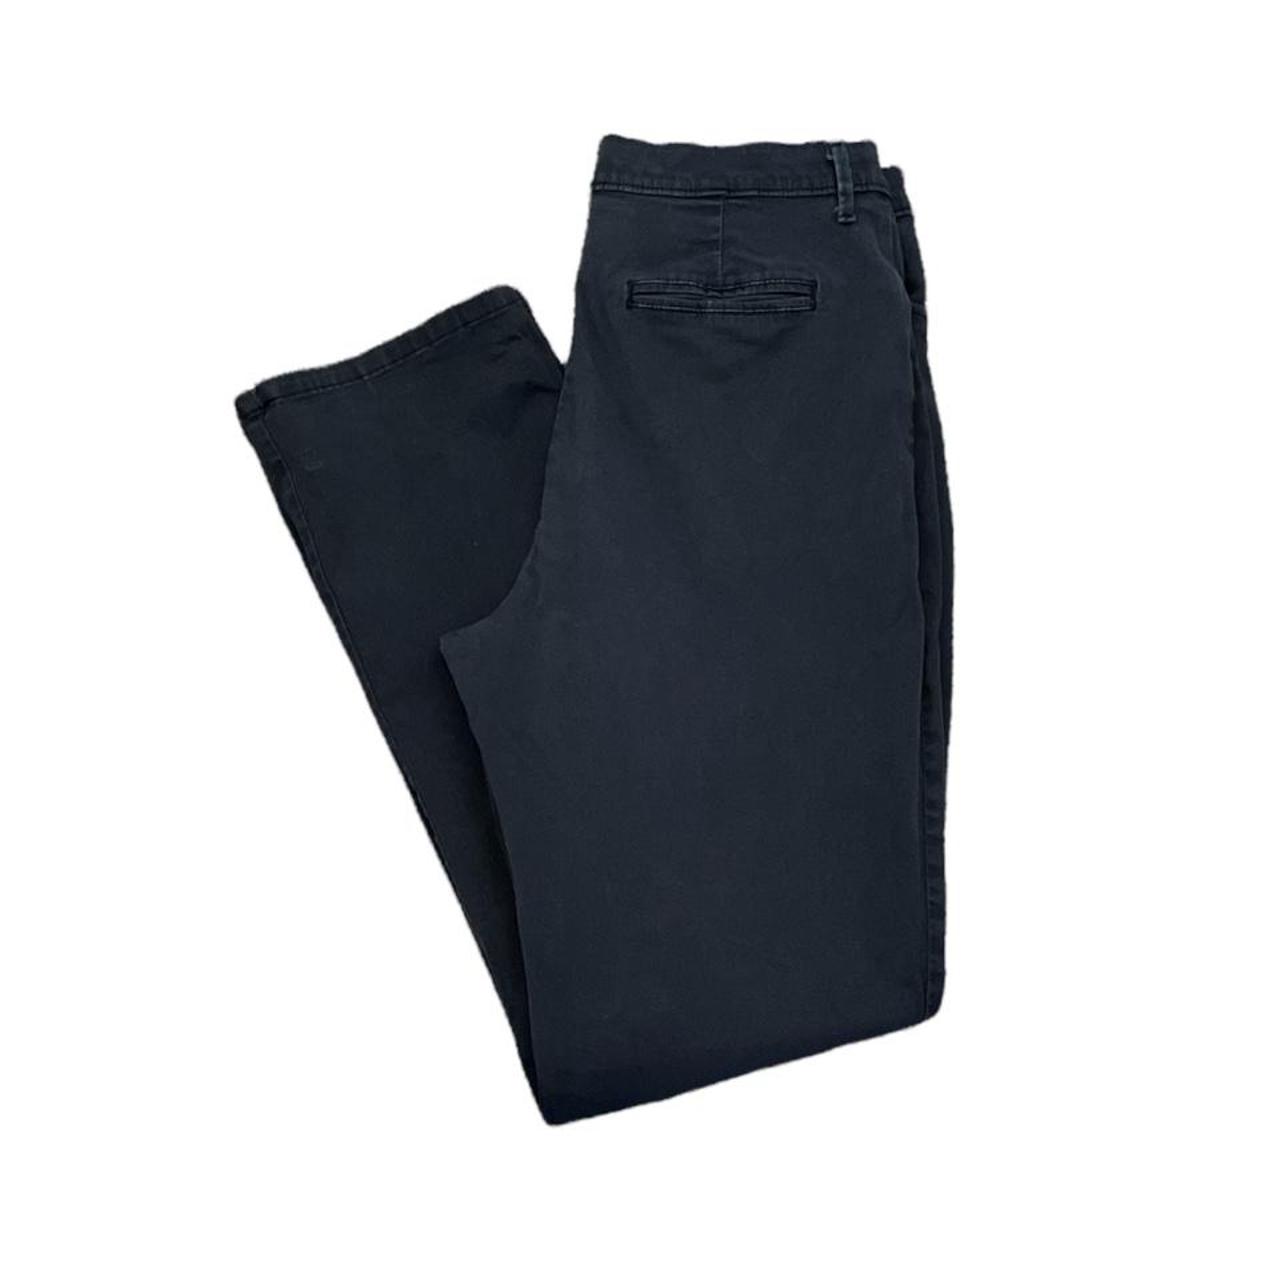 LEE Womens All Day Pants Navy Blue > Size - W- 30